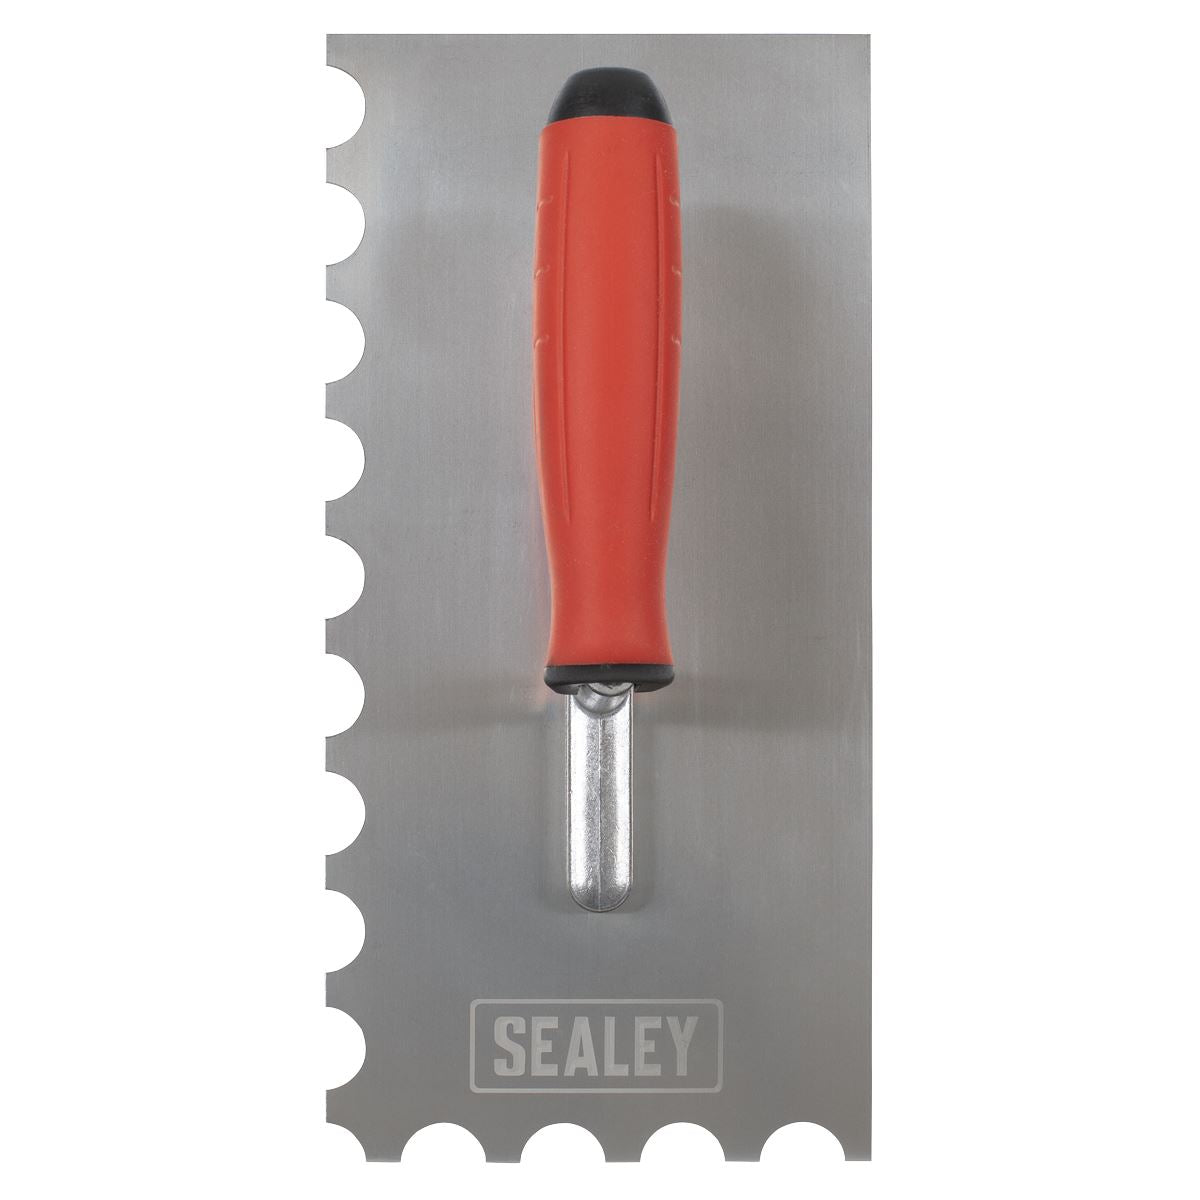 Sealey Stainless Steel 270mm Semicircle Tooth Trowel - Rubber Handle - Aluminium Foot